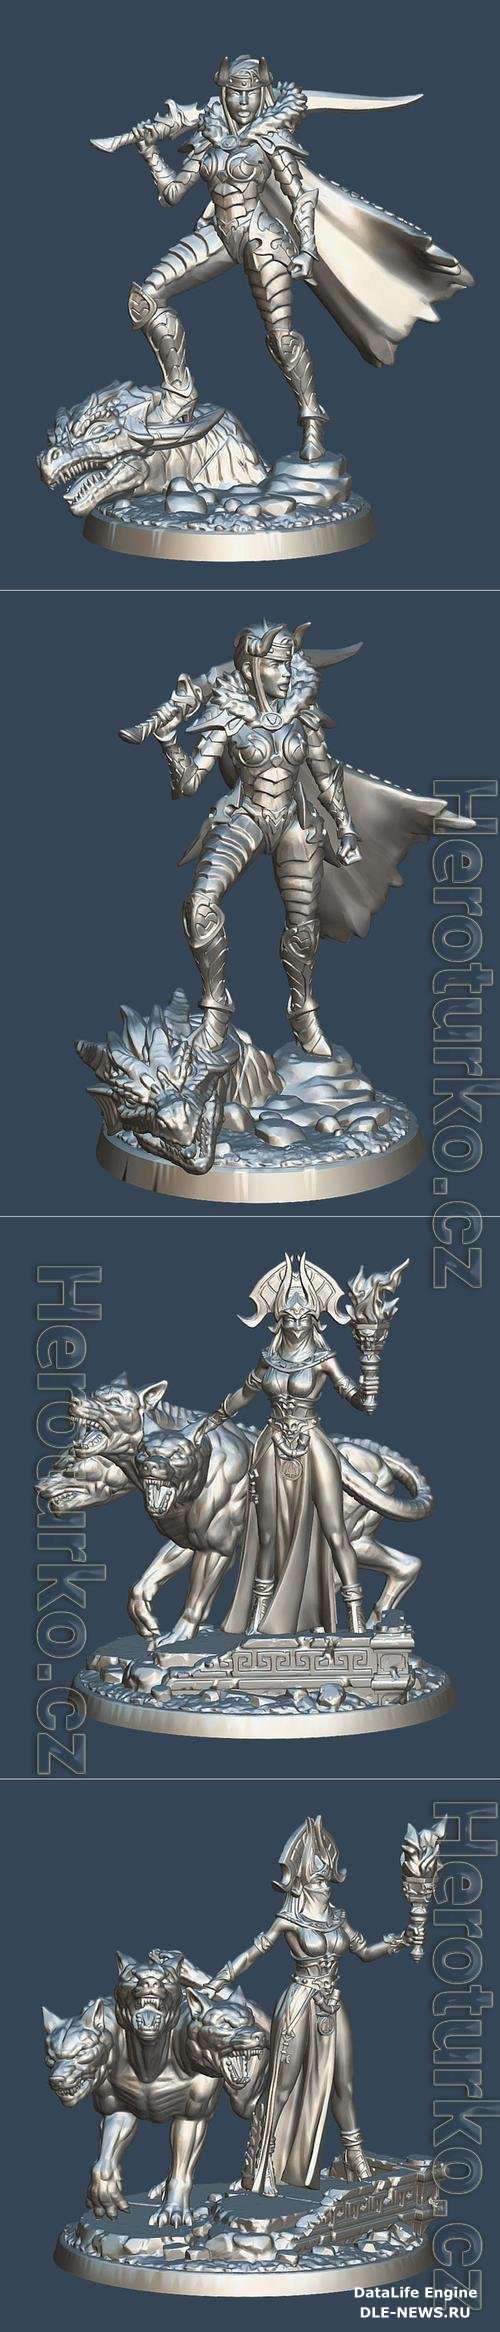 Dragon Slayer and Daughter of Persephone Necromancer 3D Print Model